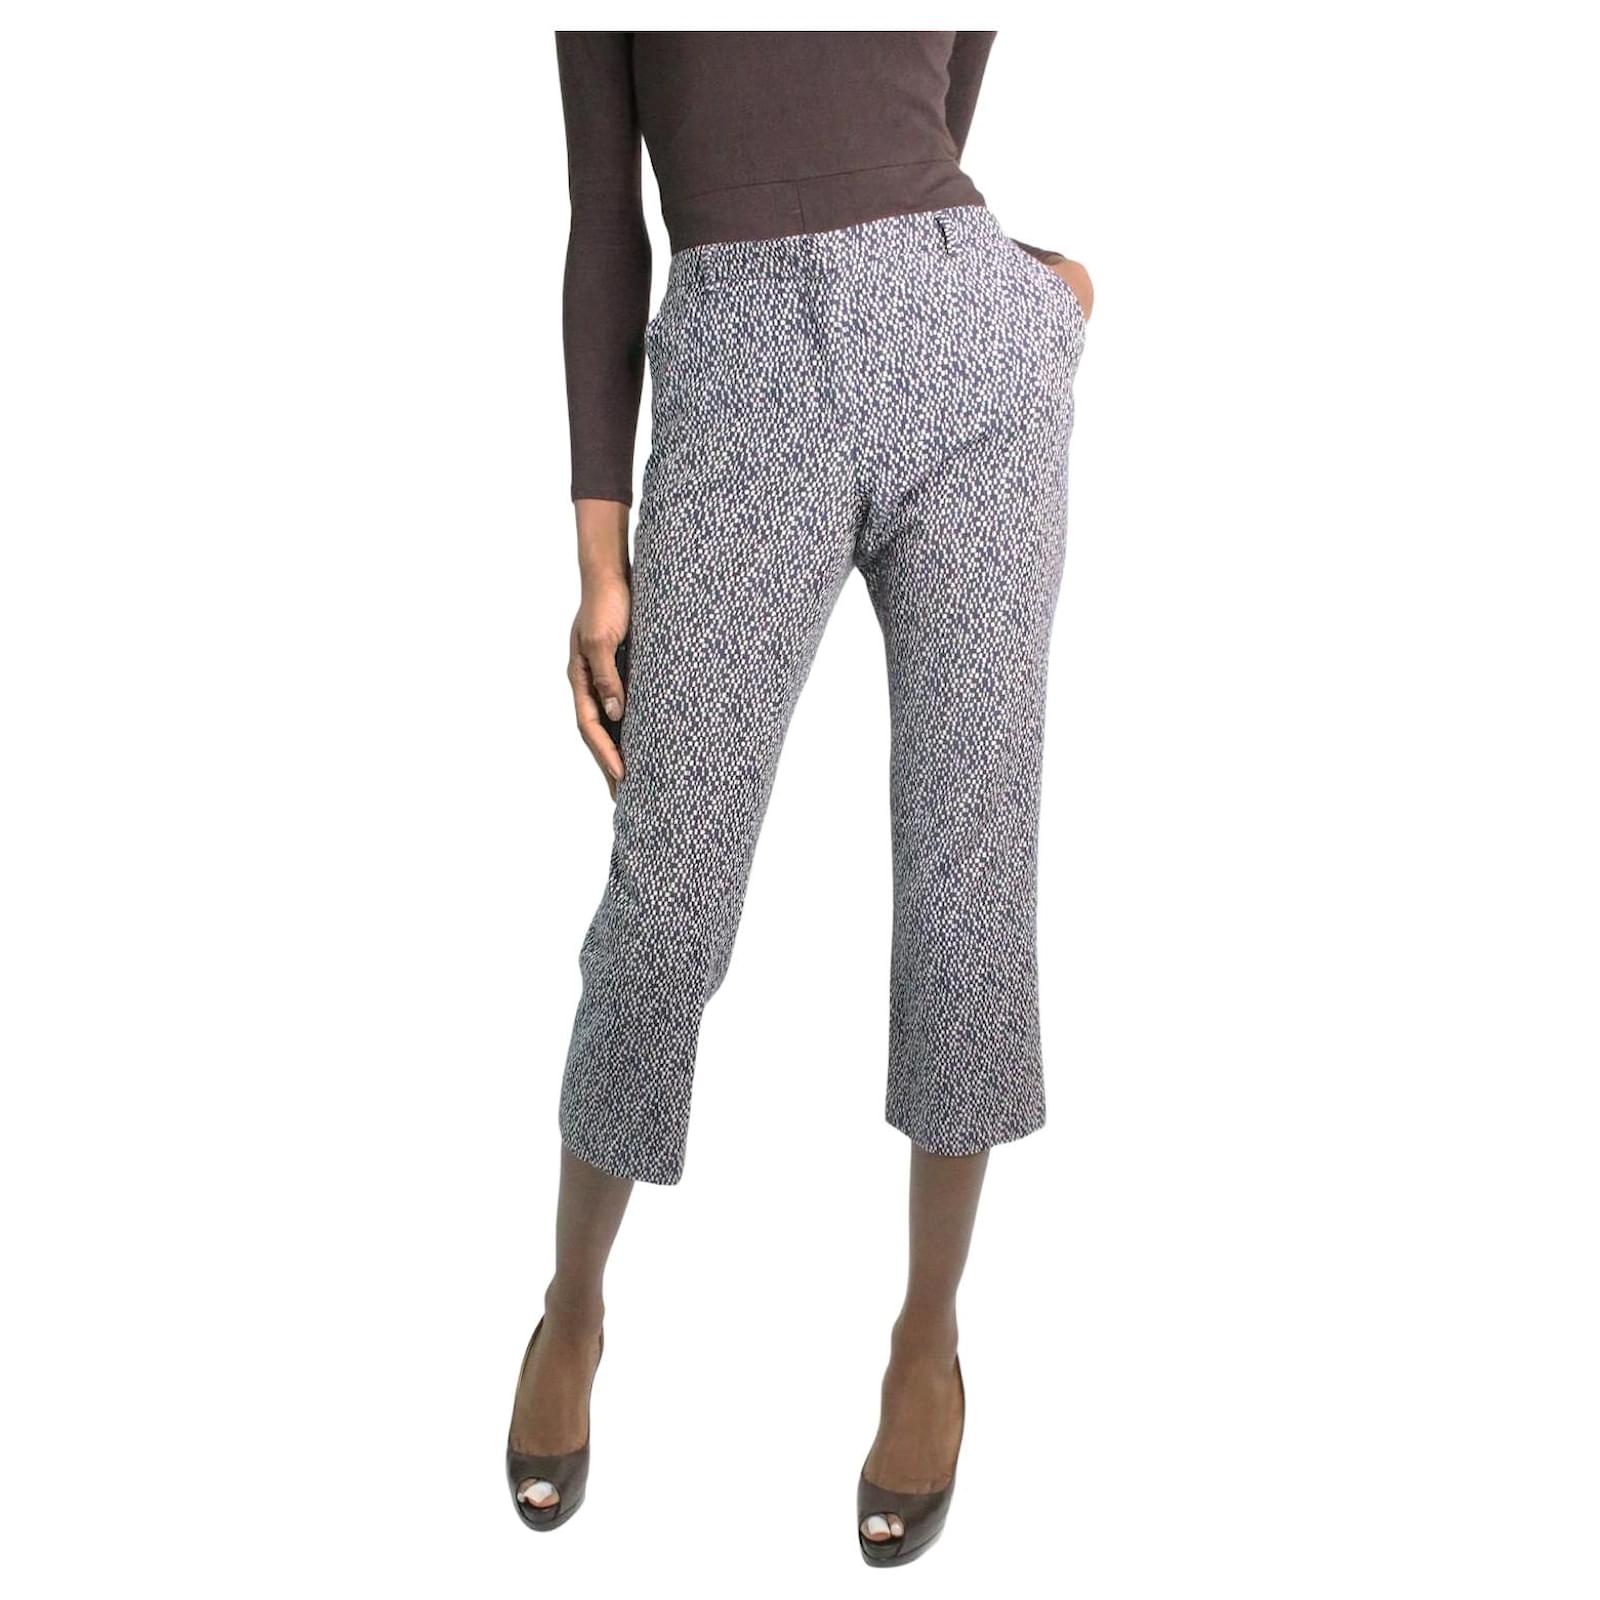 Weekend Max Mara Blue printed trousers - size UK 10 Cotton ref